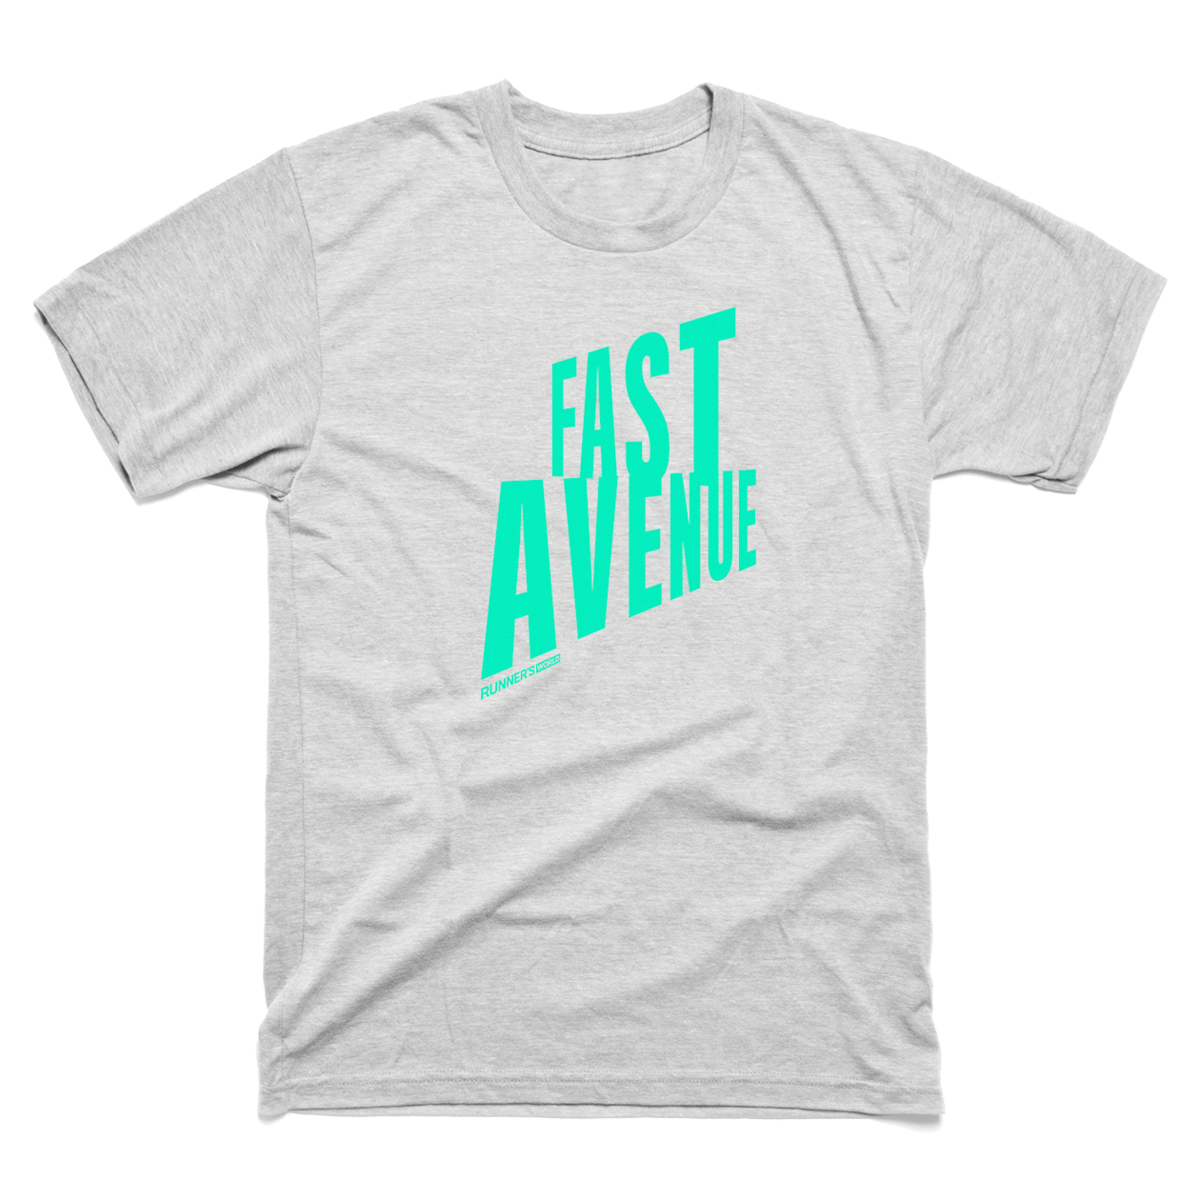 T-shirt, White, Clothing, Green, Black, Active shirt, Text, Product, Font, Sleeve, 